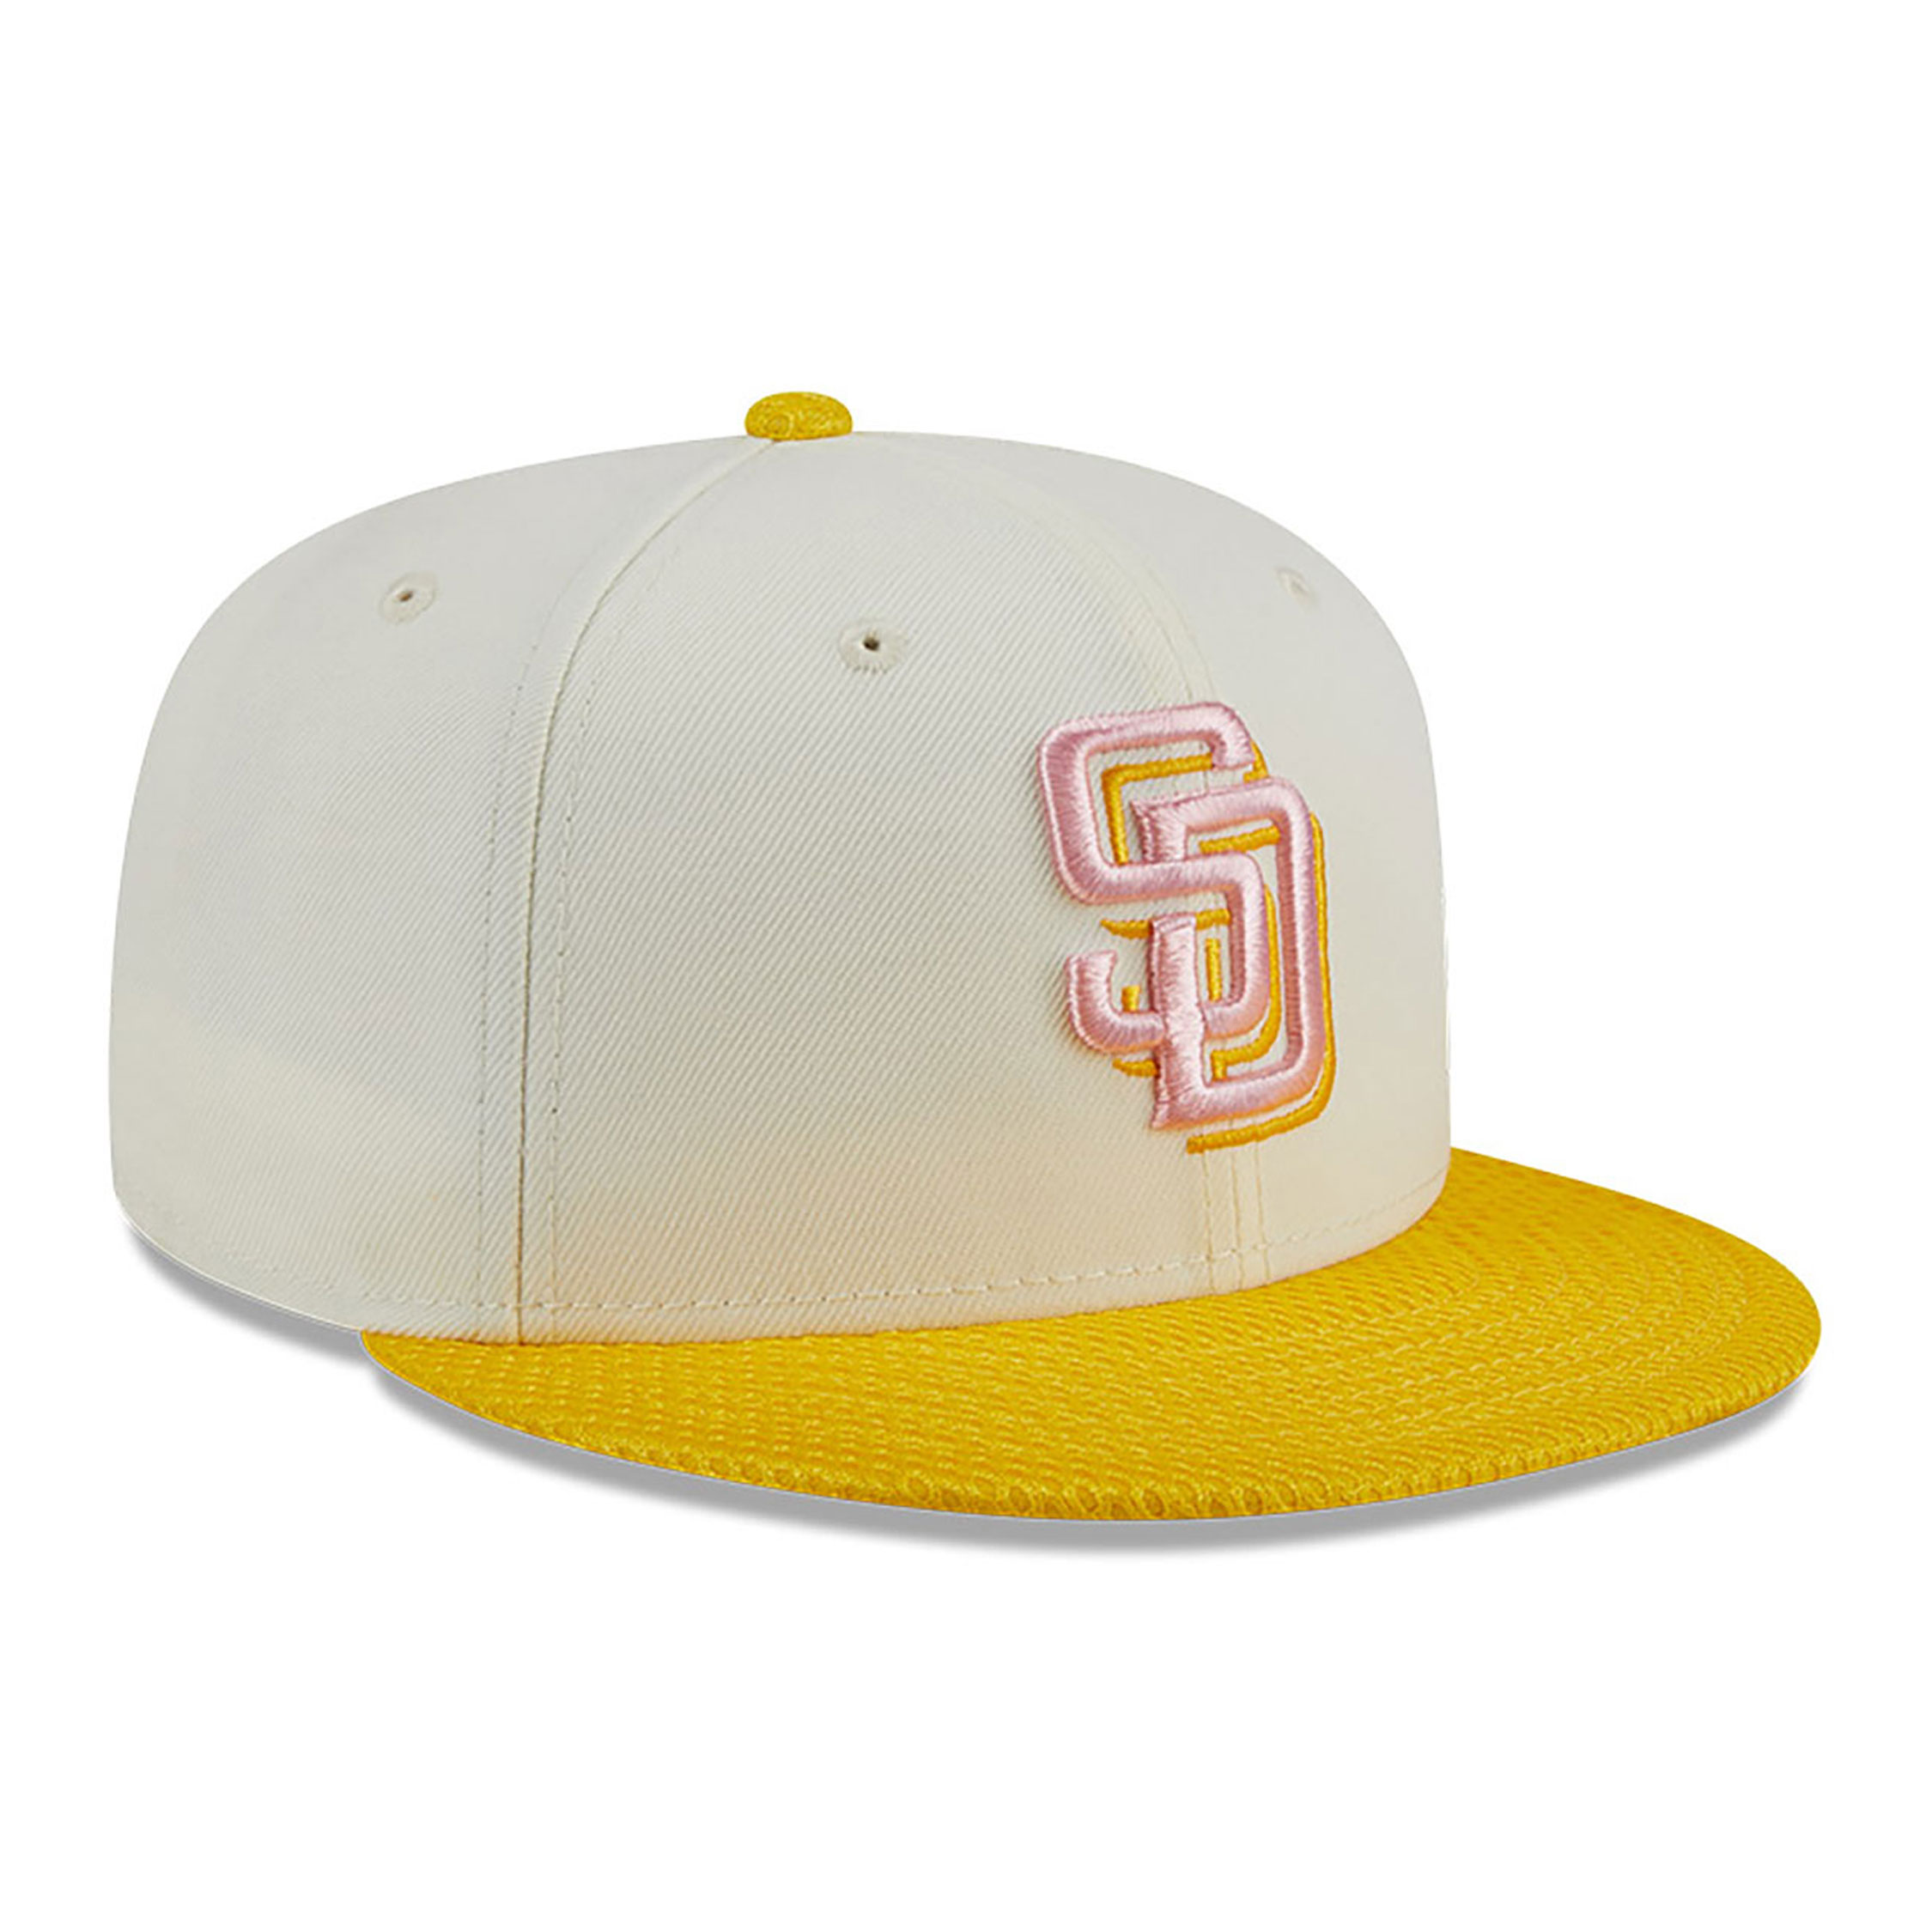 San Diego Padres City Mesh Chrome White 59FIFTY Fitted Cap